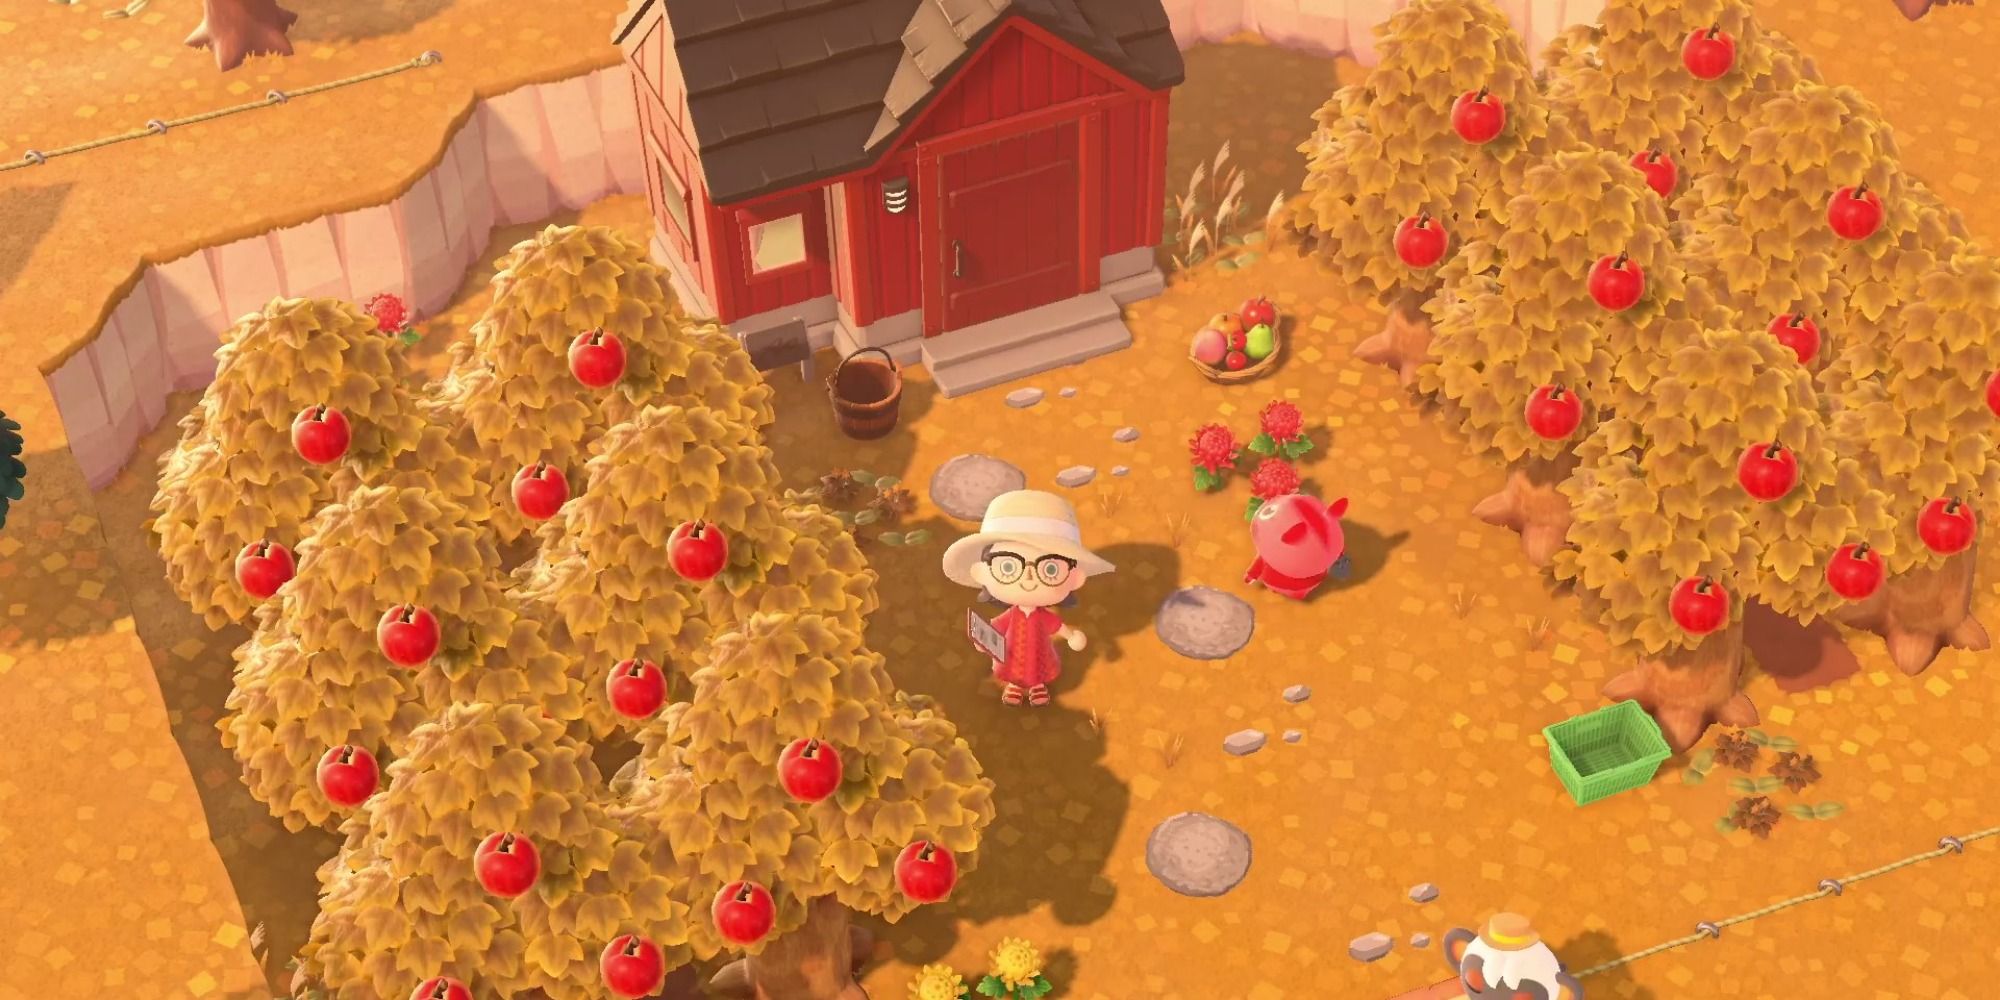 A player stands in an autumn apple orchard on a custom designed stone path